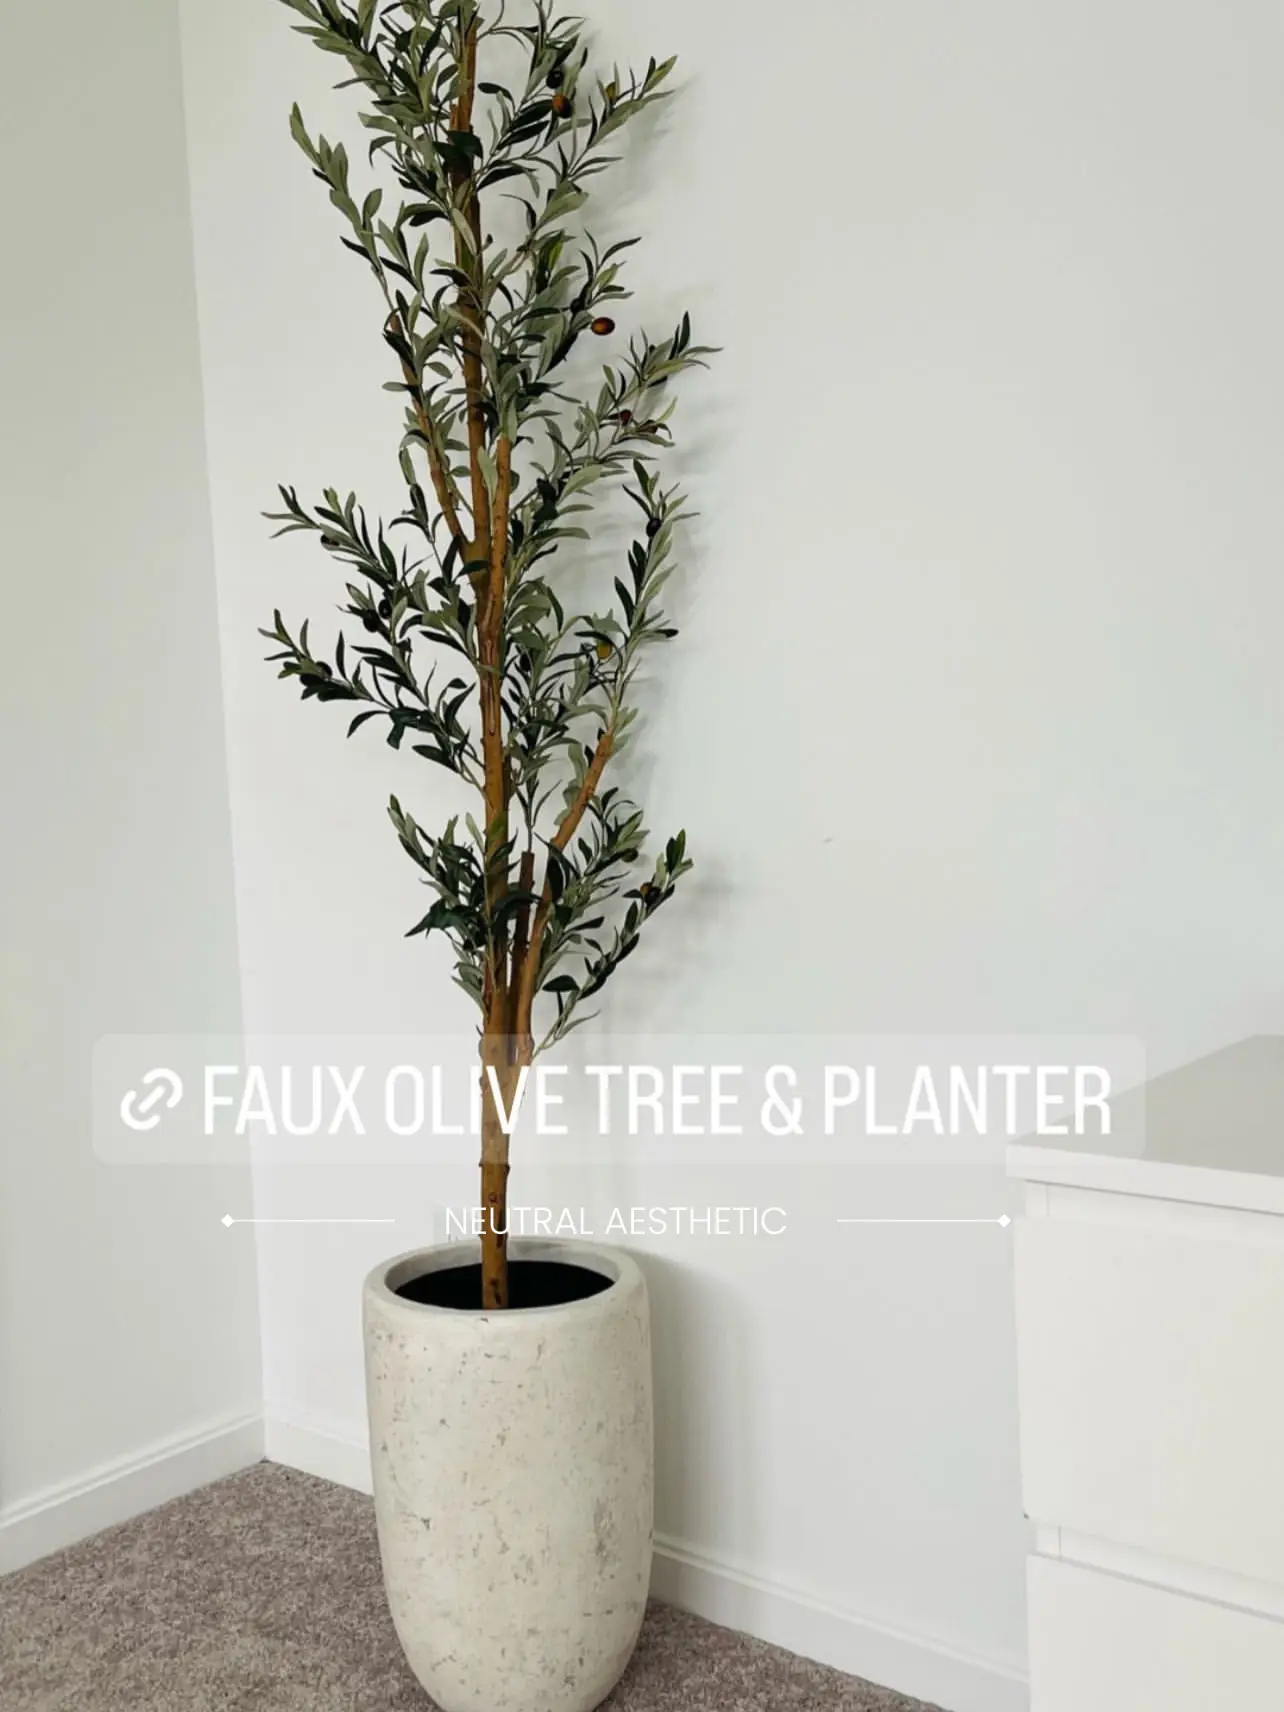 Fake potted trees - Lemon8 Search